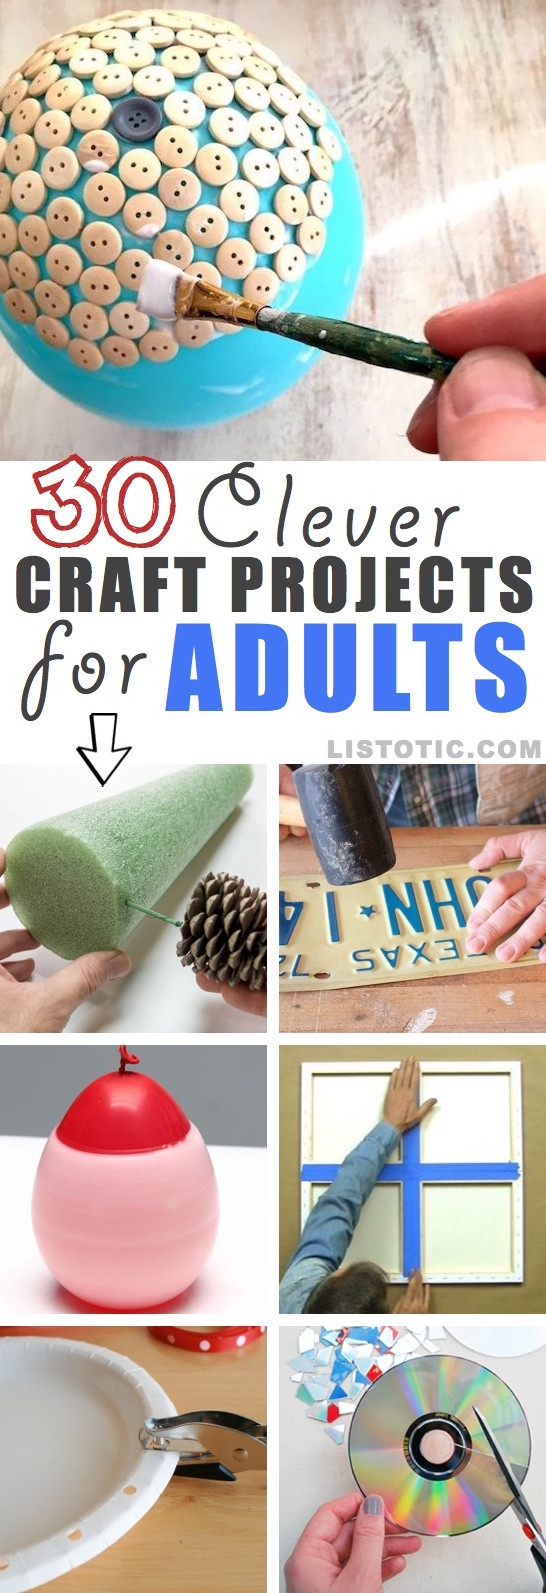 DIY Crafts For Adults
 Easy DIY Craft Ideas That Will Spark Your Creativity for